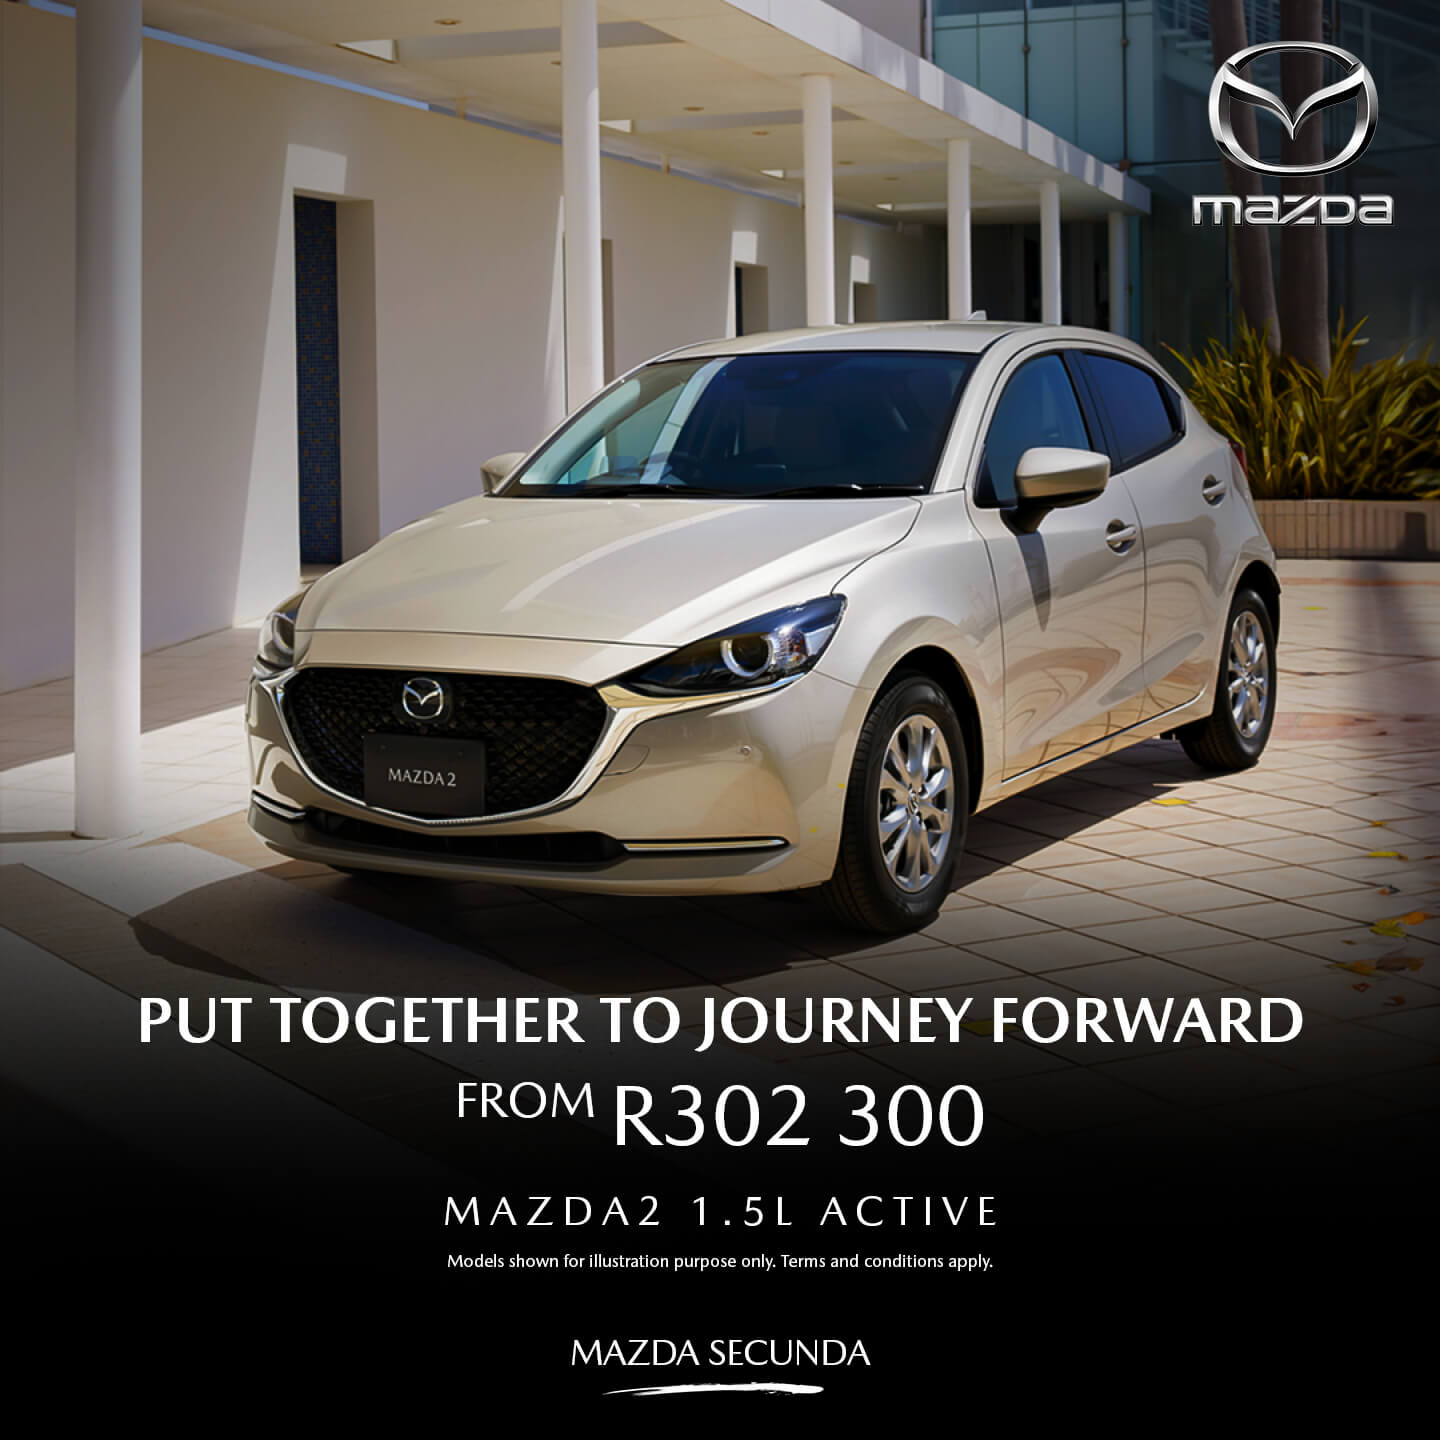 MAZDA 2 1.5L ACTIVE image from 